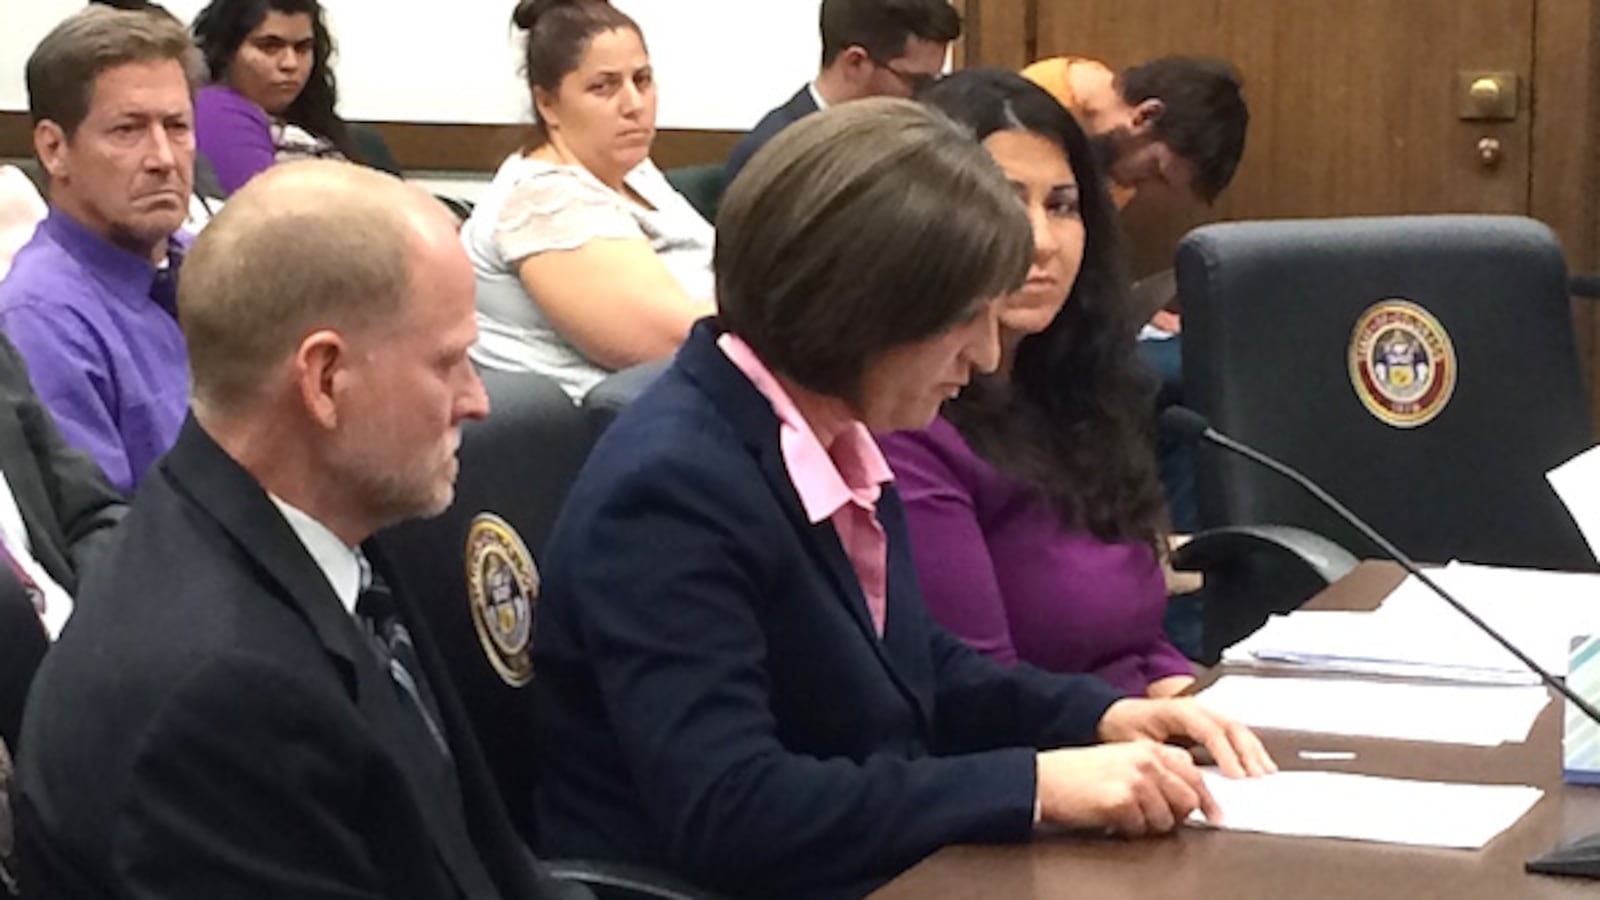 Desiree Davis (center) testifies at the Capitol while husband Michael (left) listens.